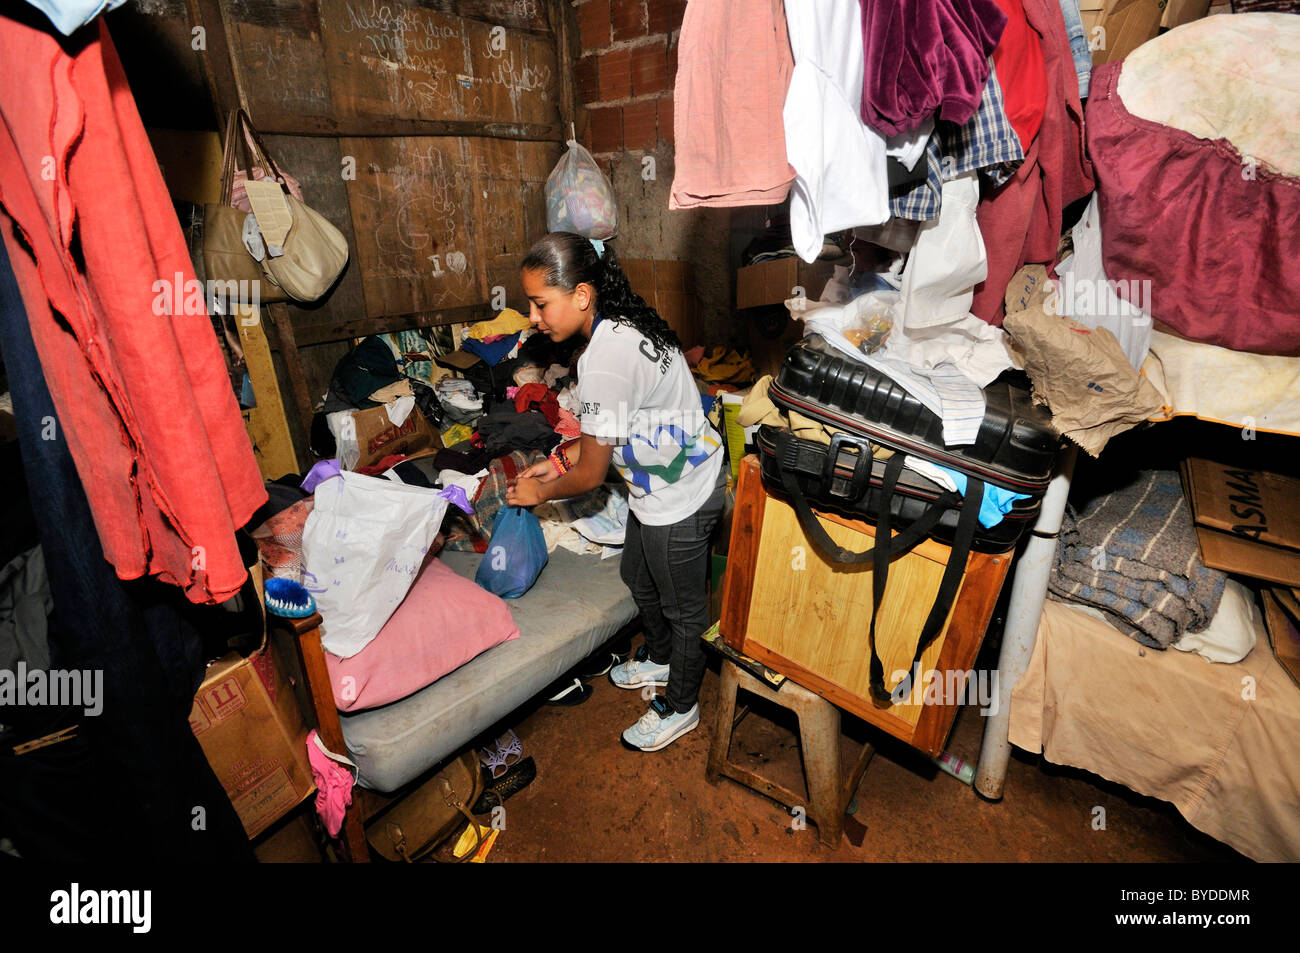 Juvenile, 15, lives with her family in a shabby shack in a Favela or shanty town, her family lives by collecting, separating and Stock Photo